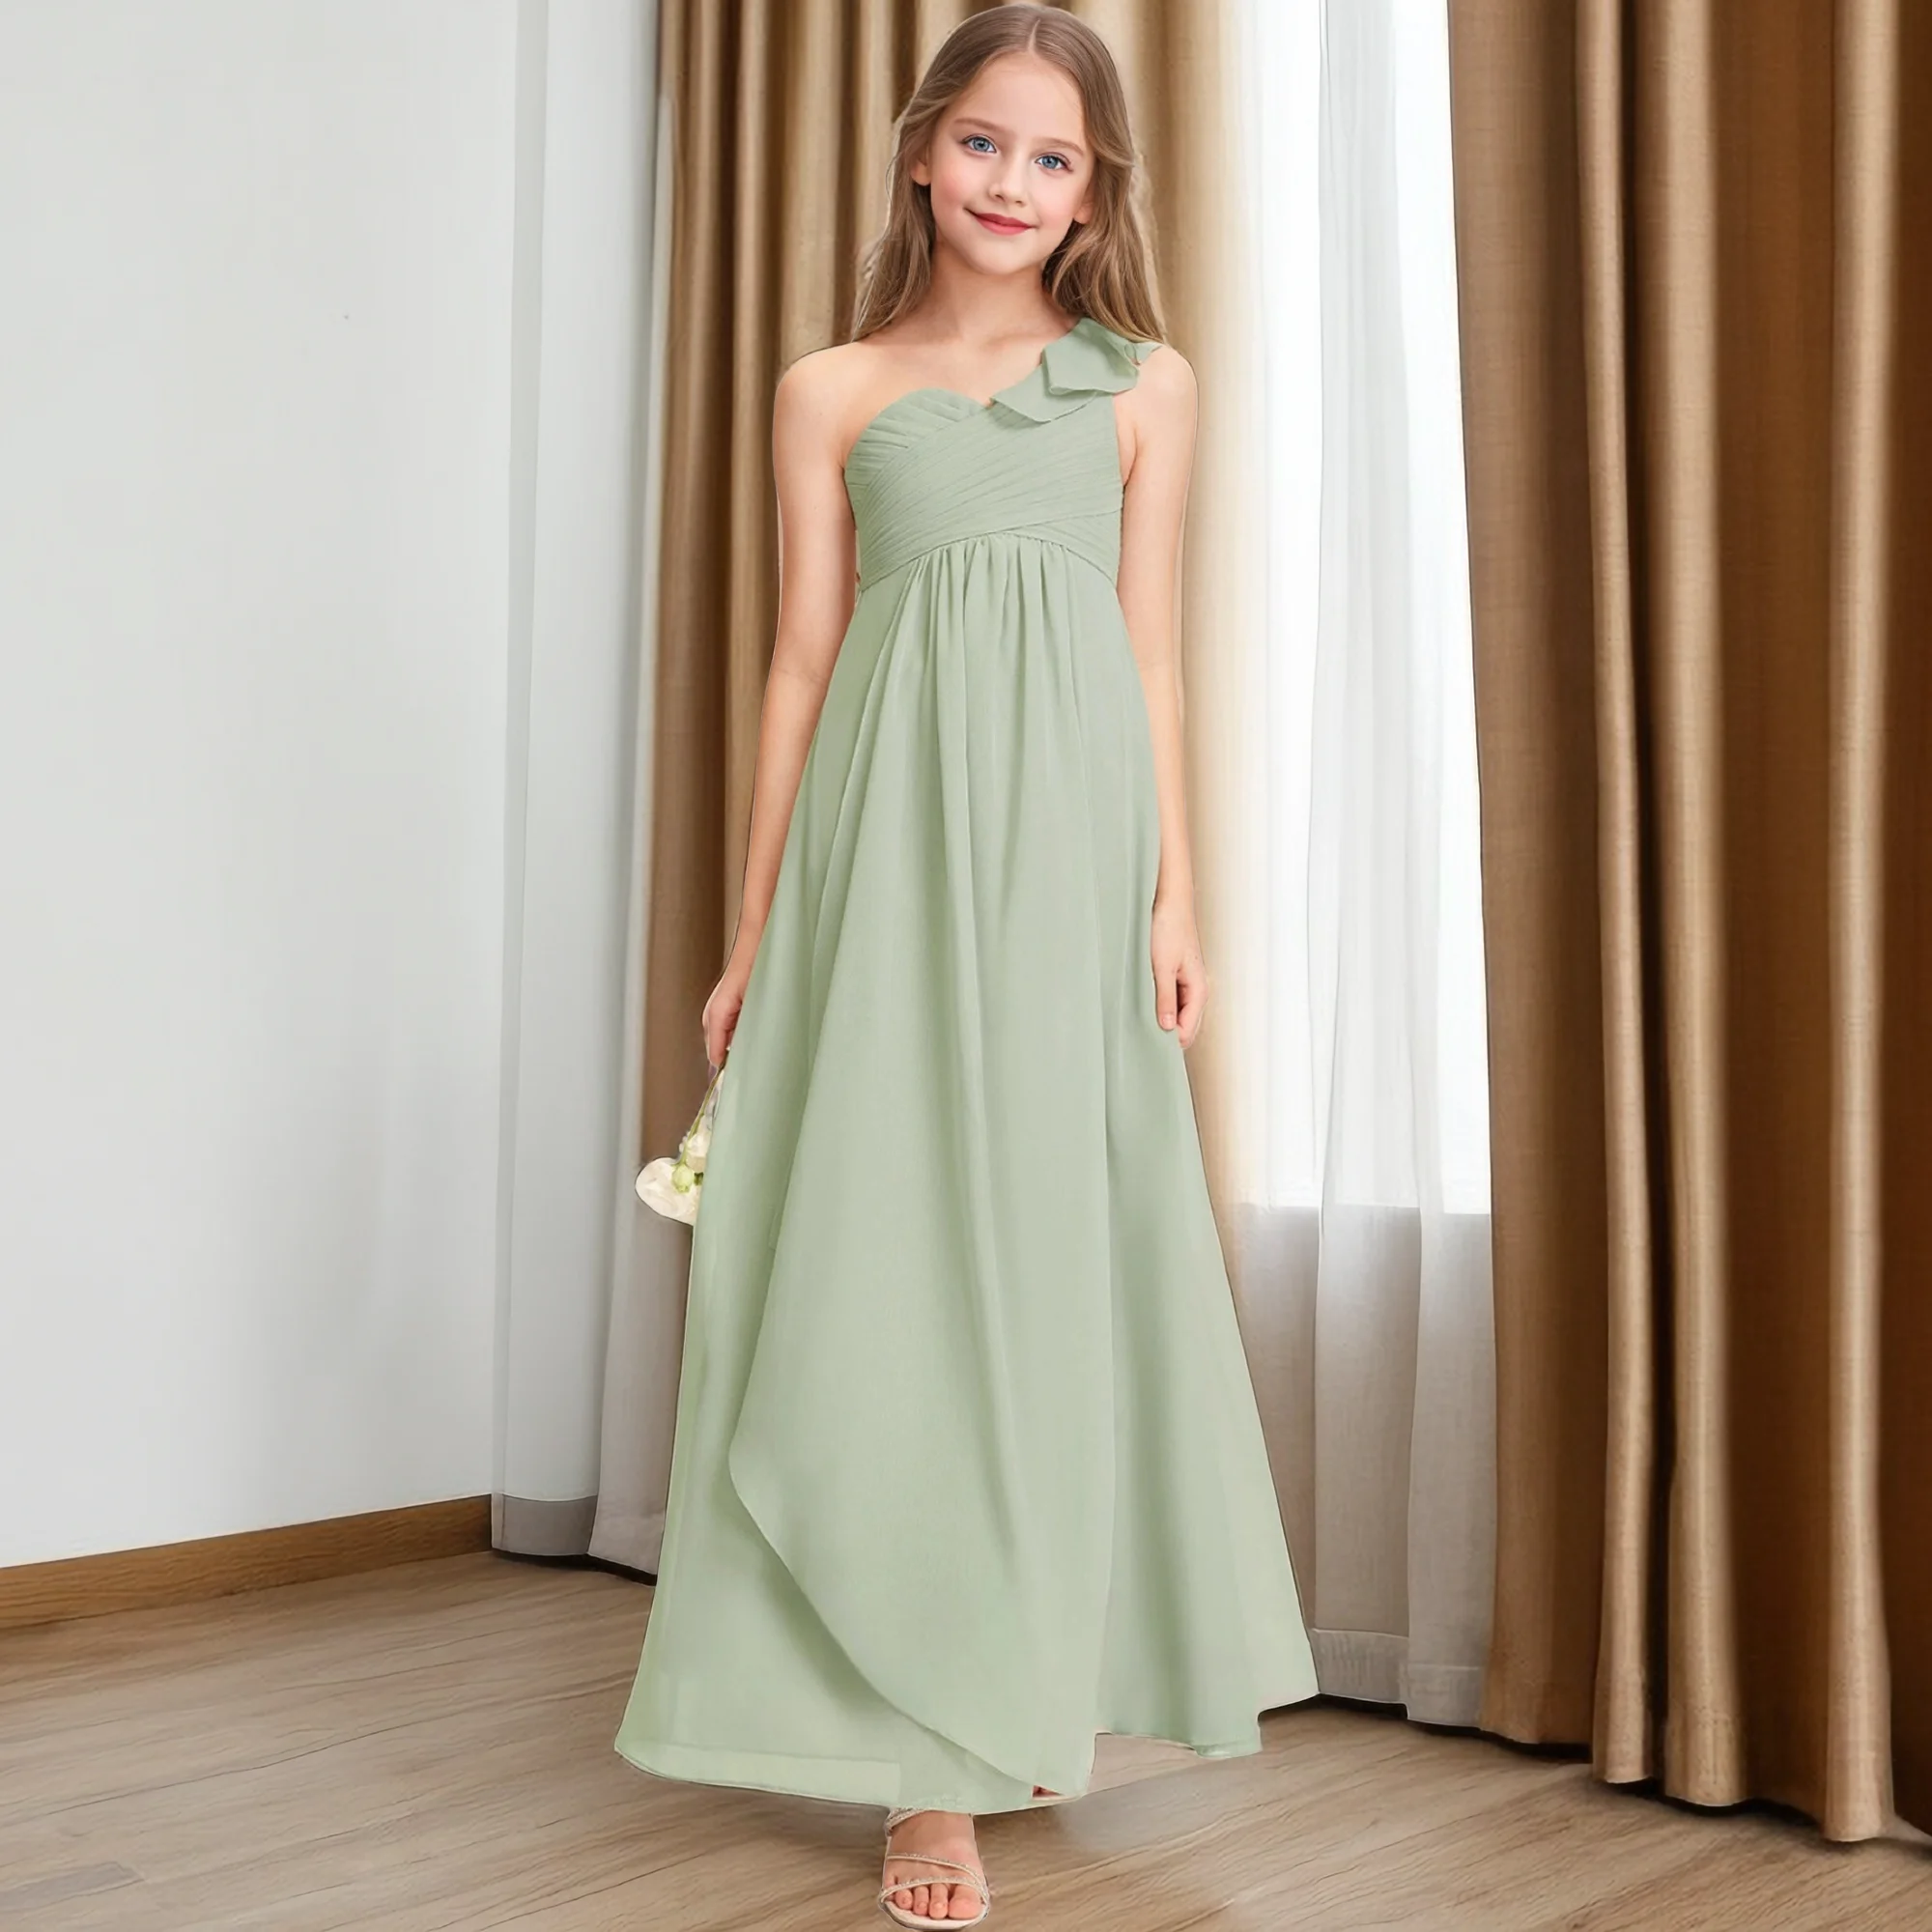 

A-Line Chiffon Junior Bridesmaid Dress For Children Wedding Ceremony Pageant Birthday Evening Party Prom Night Ball Gown Banquet